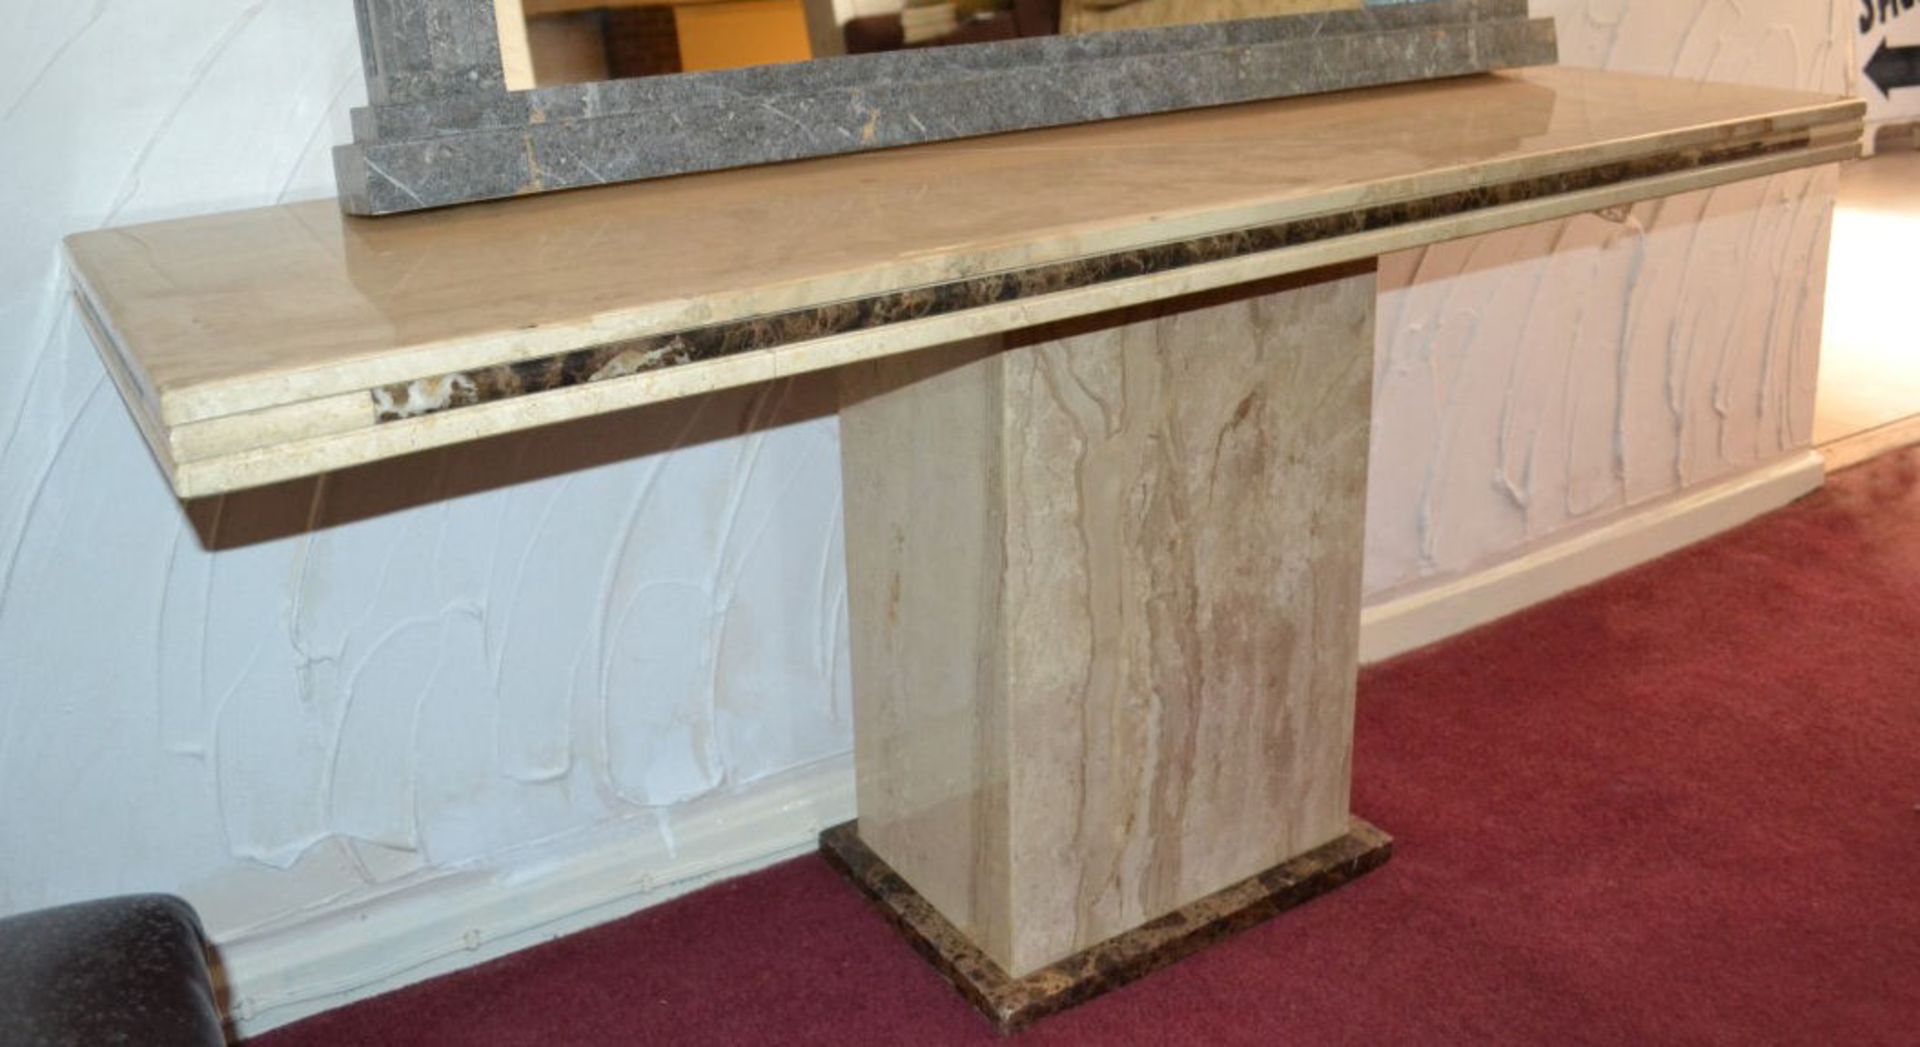 1 x Cream Marble Console Table with Chocolate Brown Edge Strip - Image 3 of 4